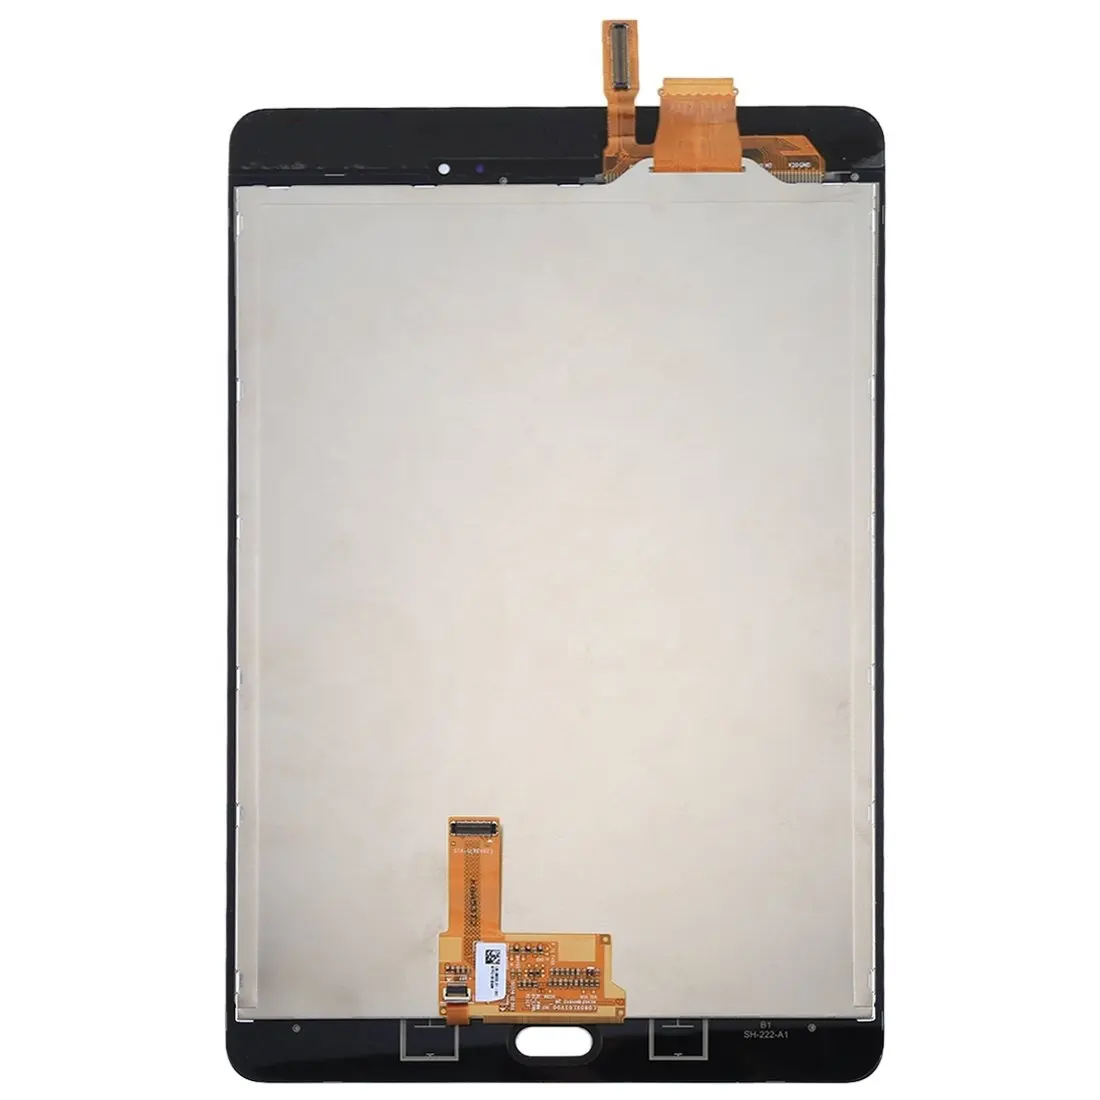 Tablet Display Thin Screen For Samsung Galaxy P350 wifi Tablet Touch Screen With Digitizer Replacement LCD Panel LCD Monitor